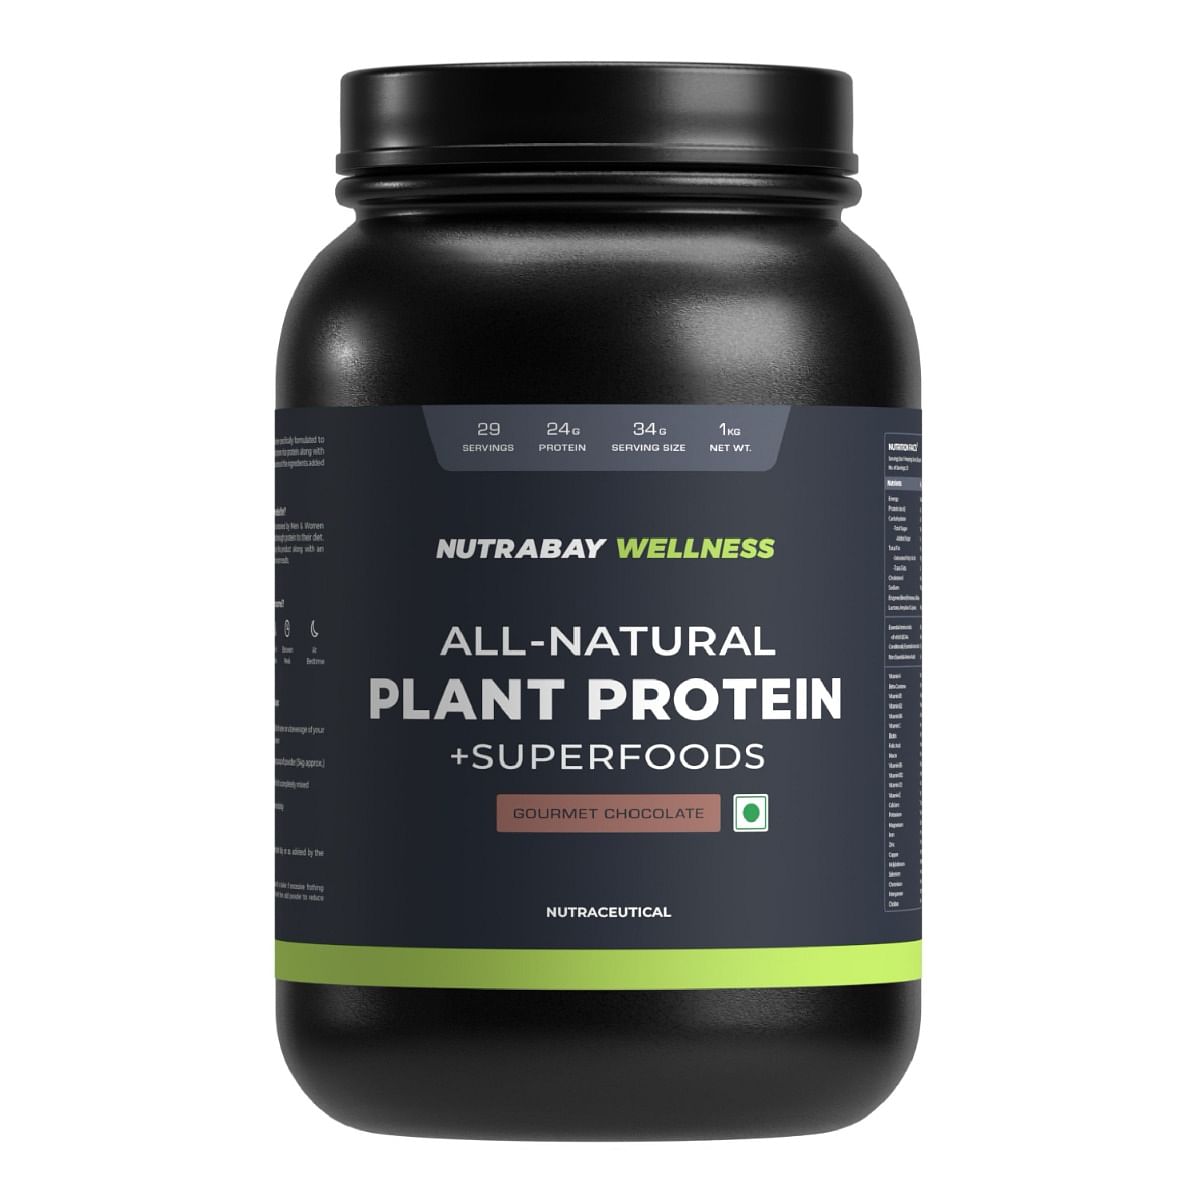 Nutrabay Wellness Plant Protein: 24g protein, pea & brown rice, stevia, digestive enzymes, 1kg gourmet chocolate.